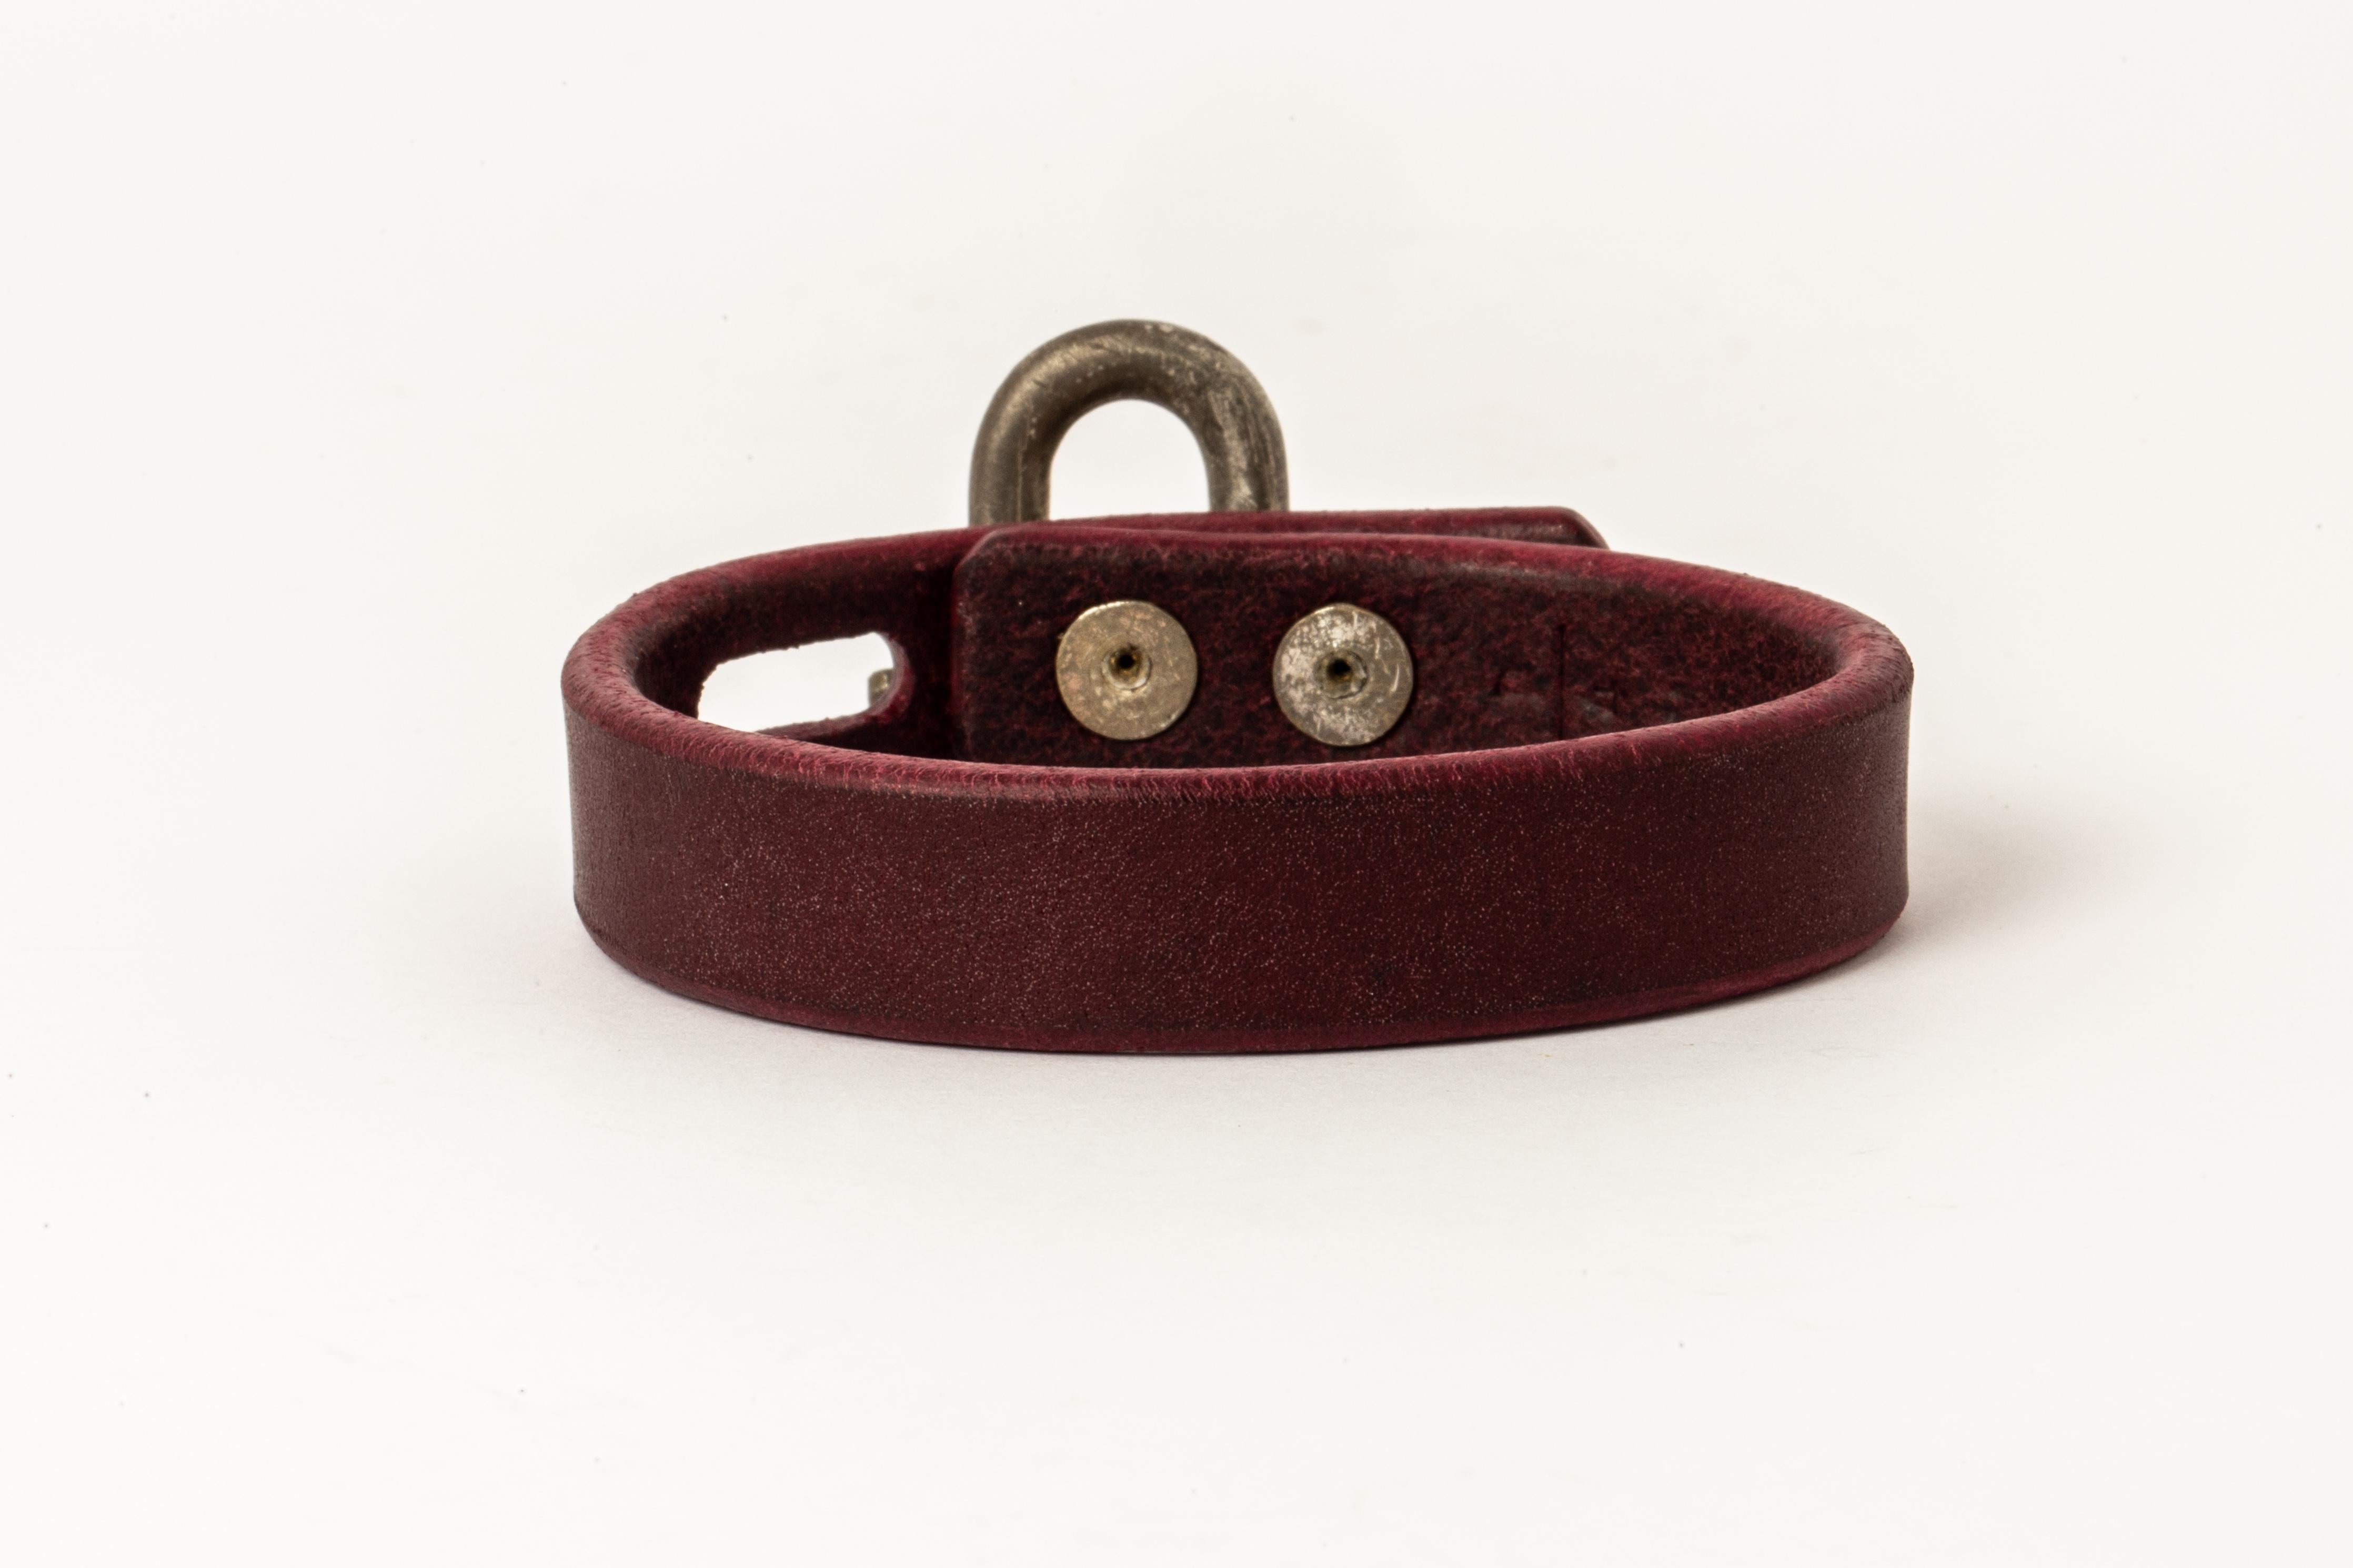 Bracelet in wine buffalo leather and super heavy acid treated gold plated brass. Items with the potential use as restraints. All P4X hardware and accessories are compatible and interchangeable.
The Charm System is an interrelated group of products